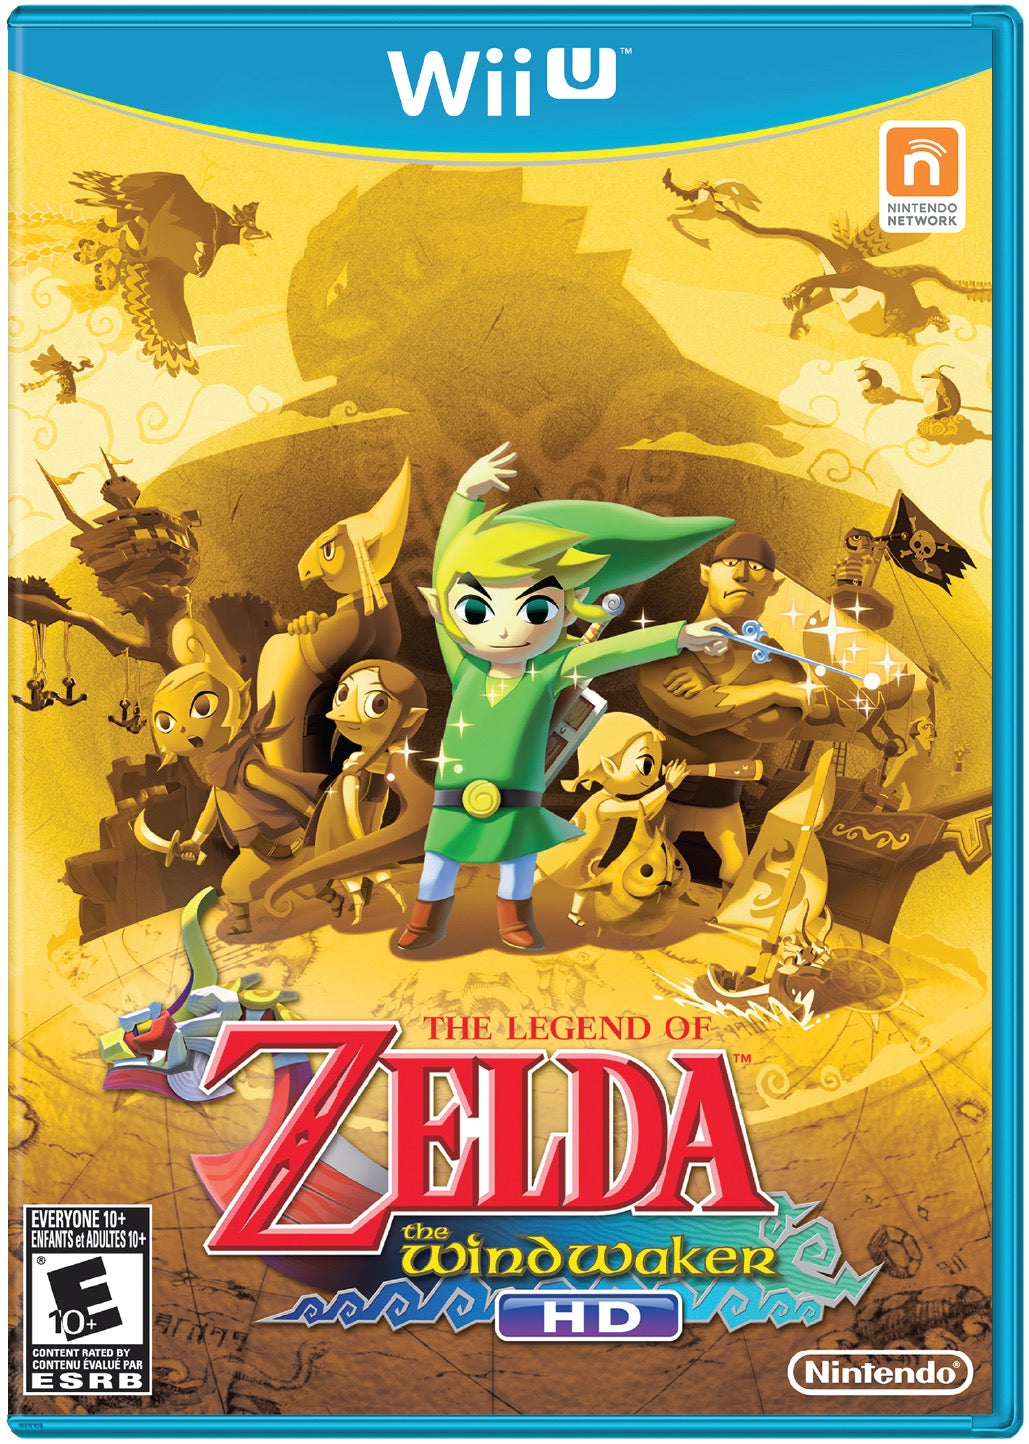 The Legend of Zelda Wind Waker HD Cover Art and Product Photo